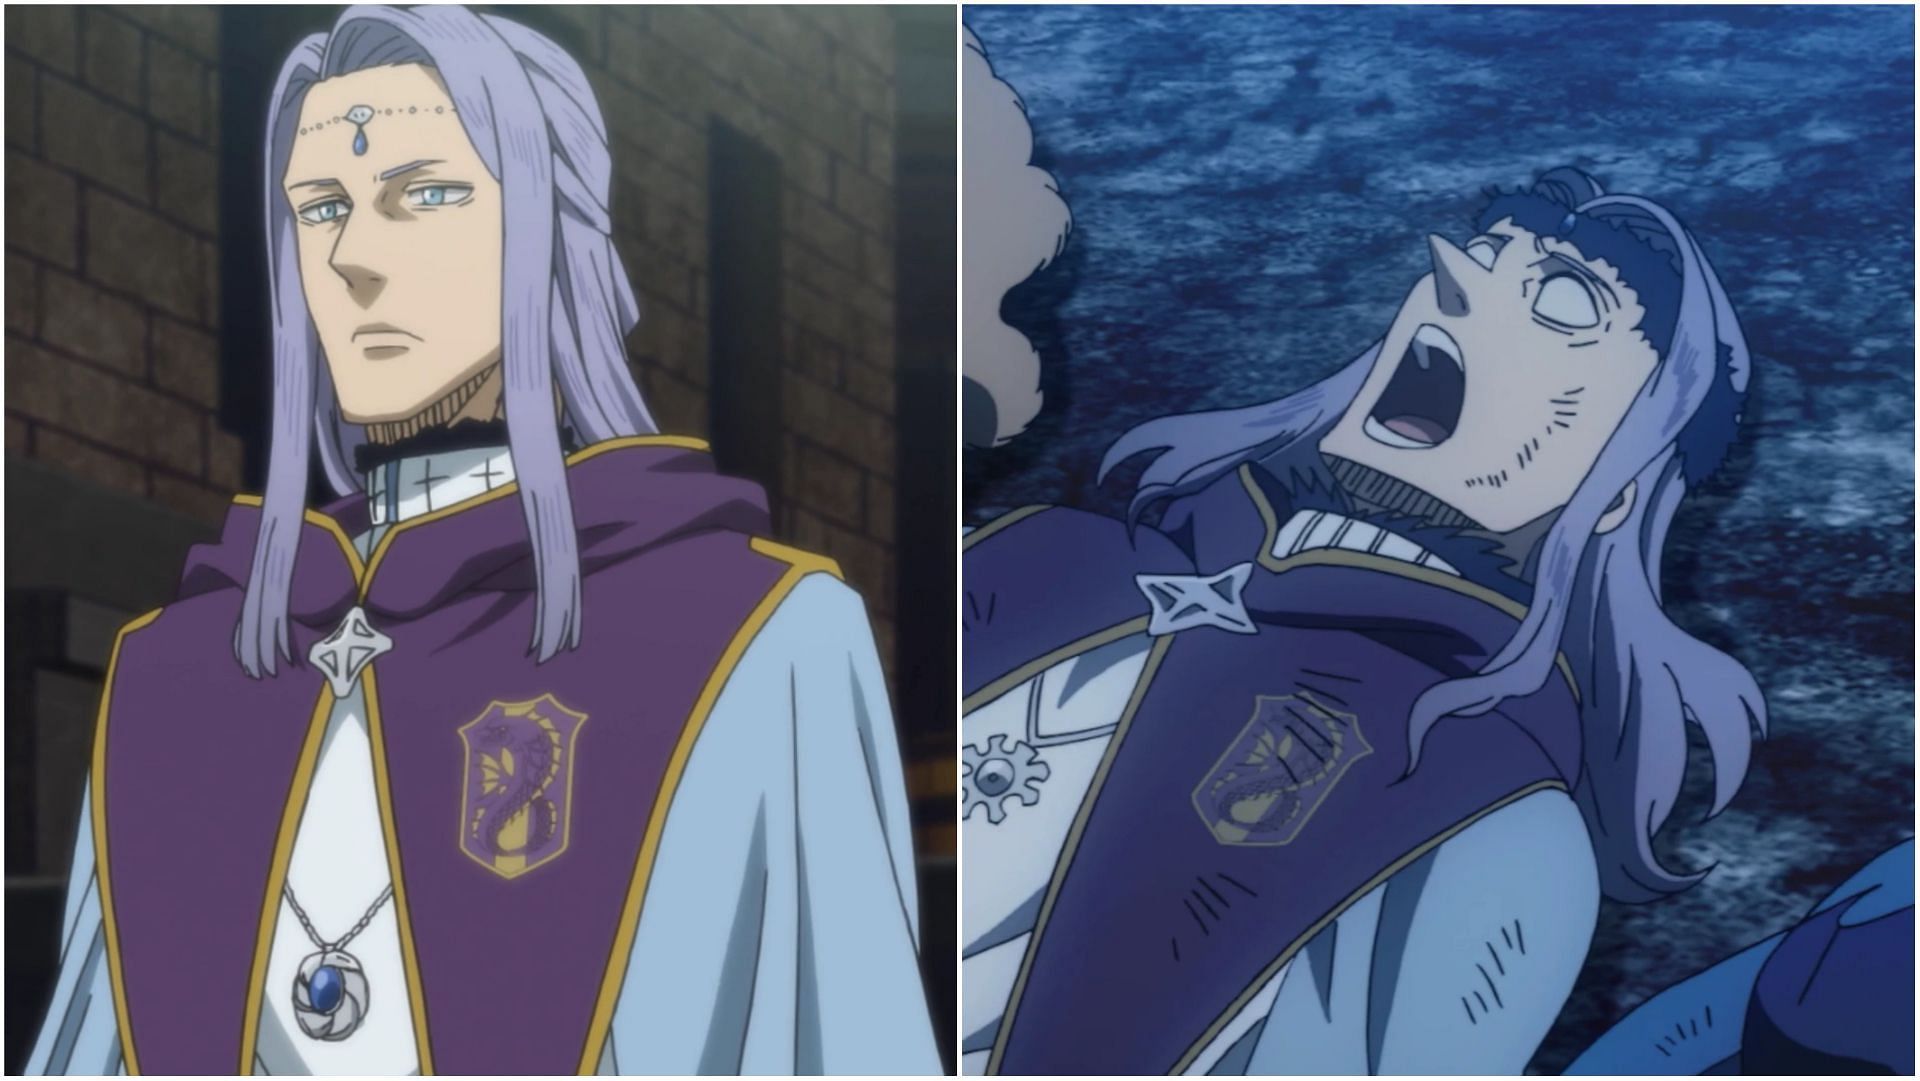 Xerx Lugner, before and after, in Black Clover (Image via Studio Pierrot)